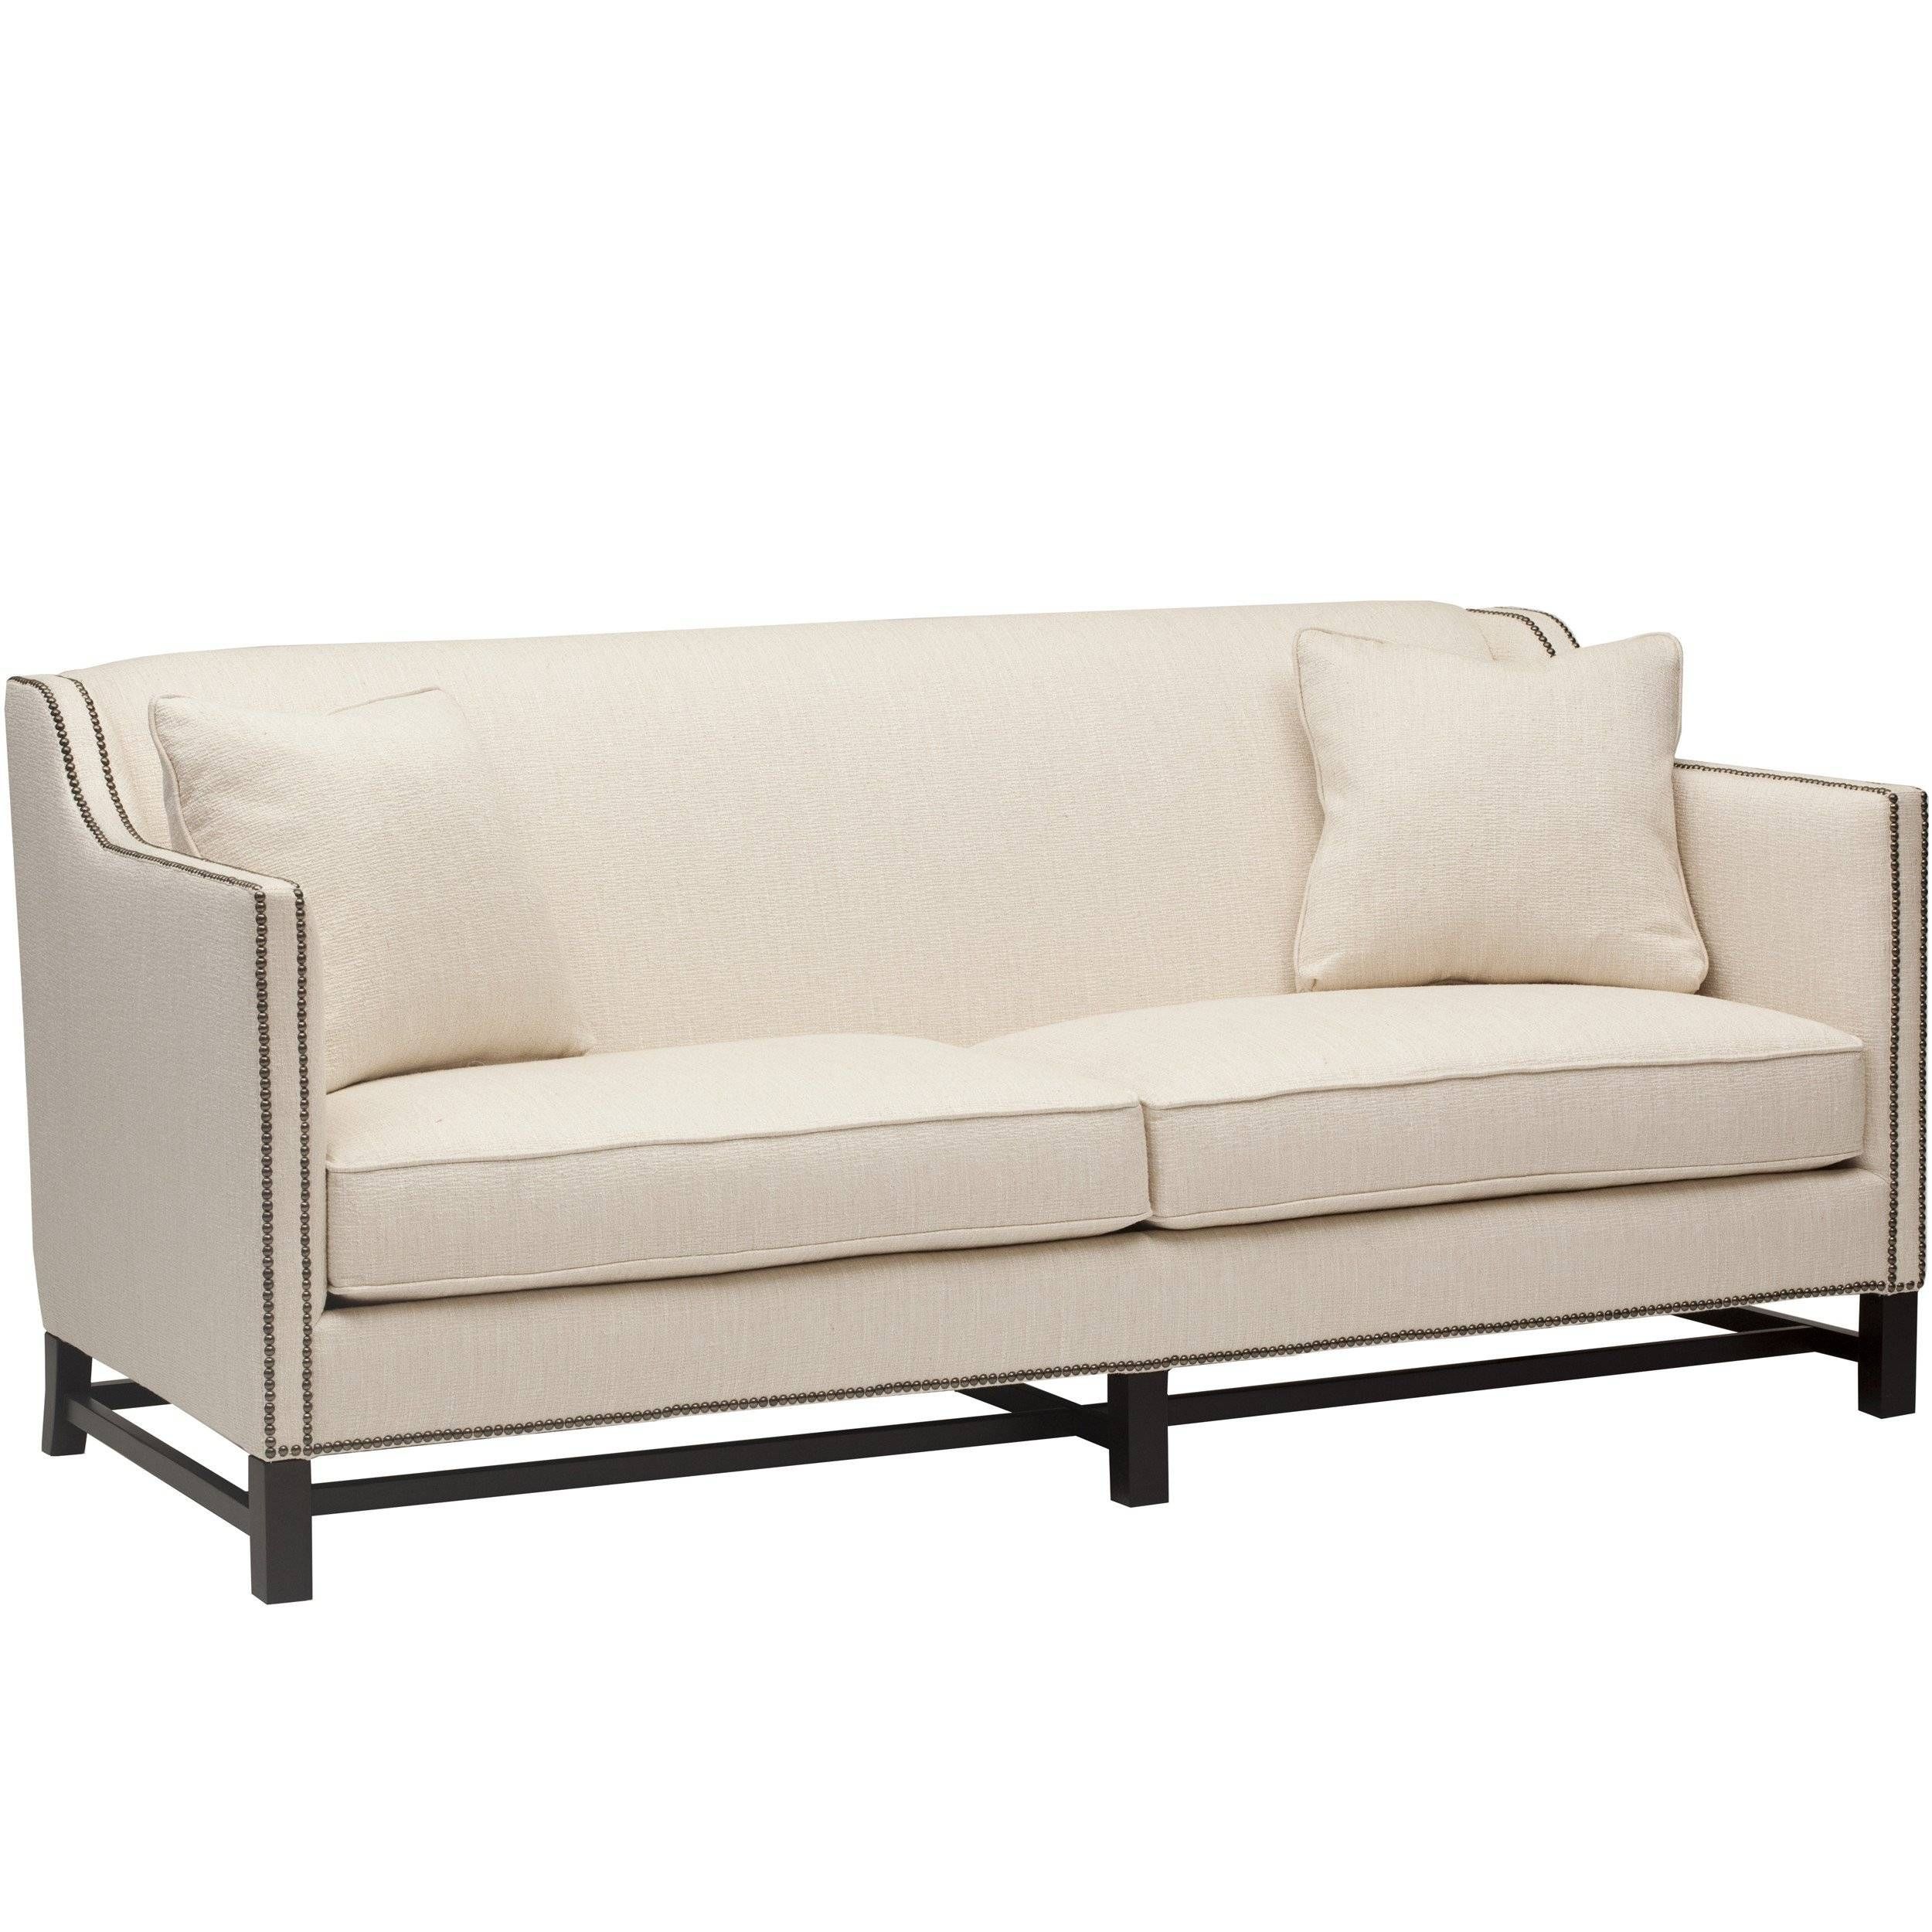 Chatham Sofa, Cream – Fabric – Sofas – Furniture With Fabric Sofas (View 29 of 30)